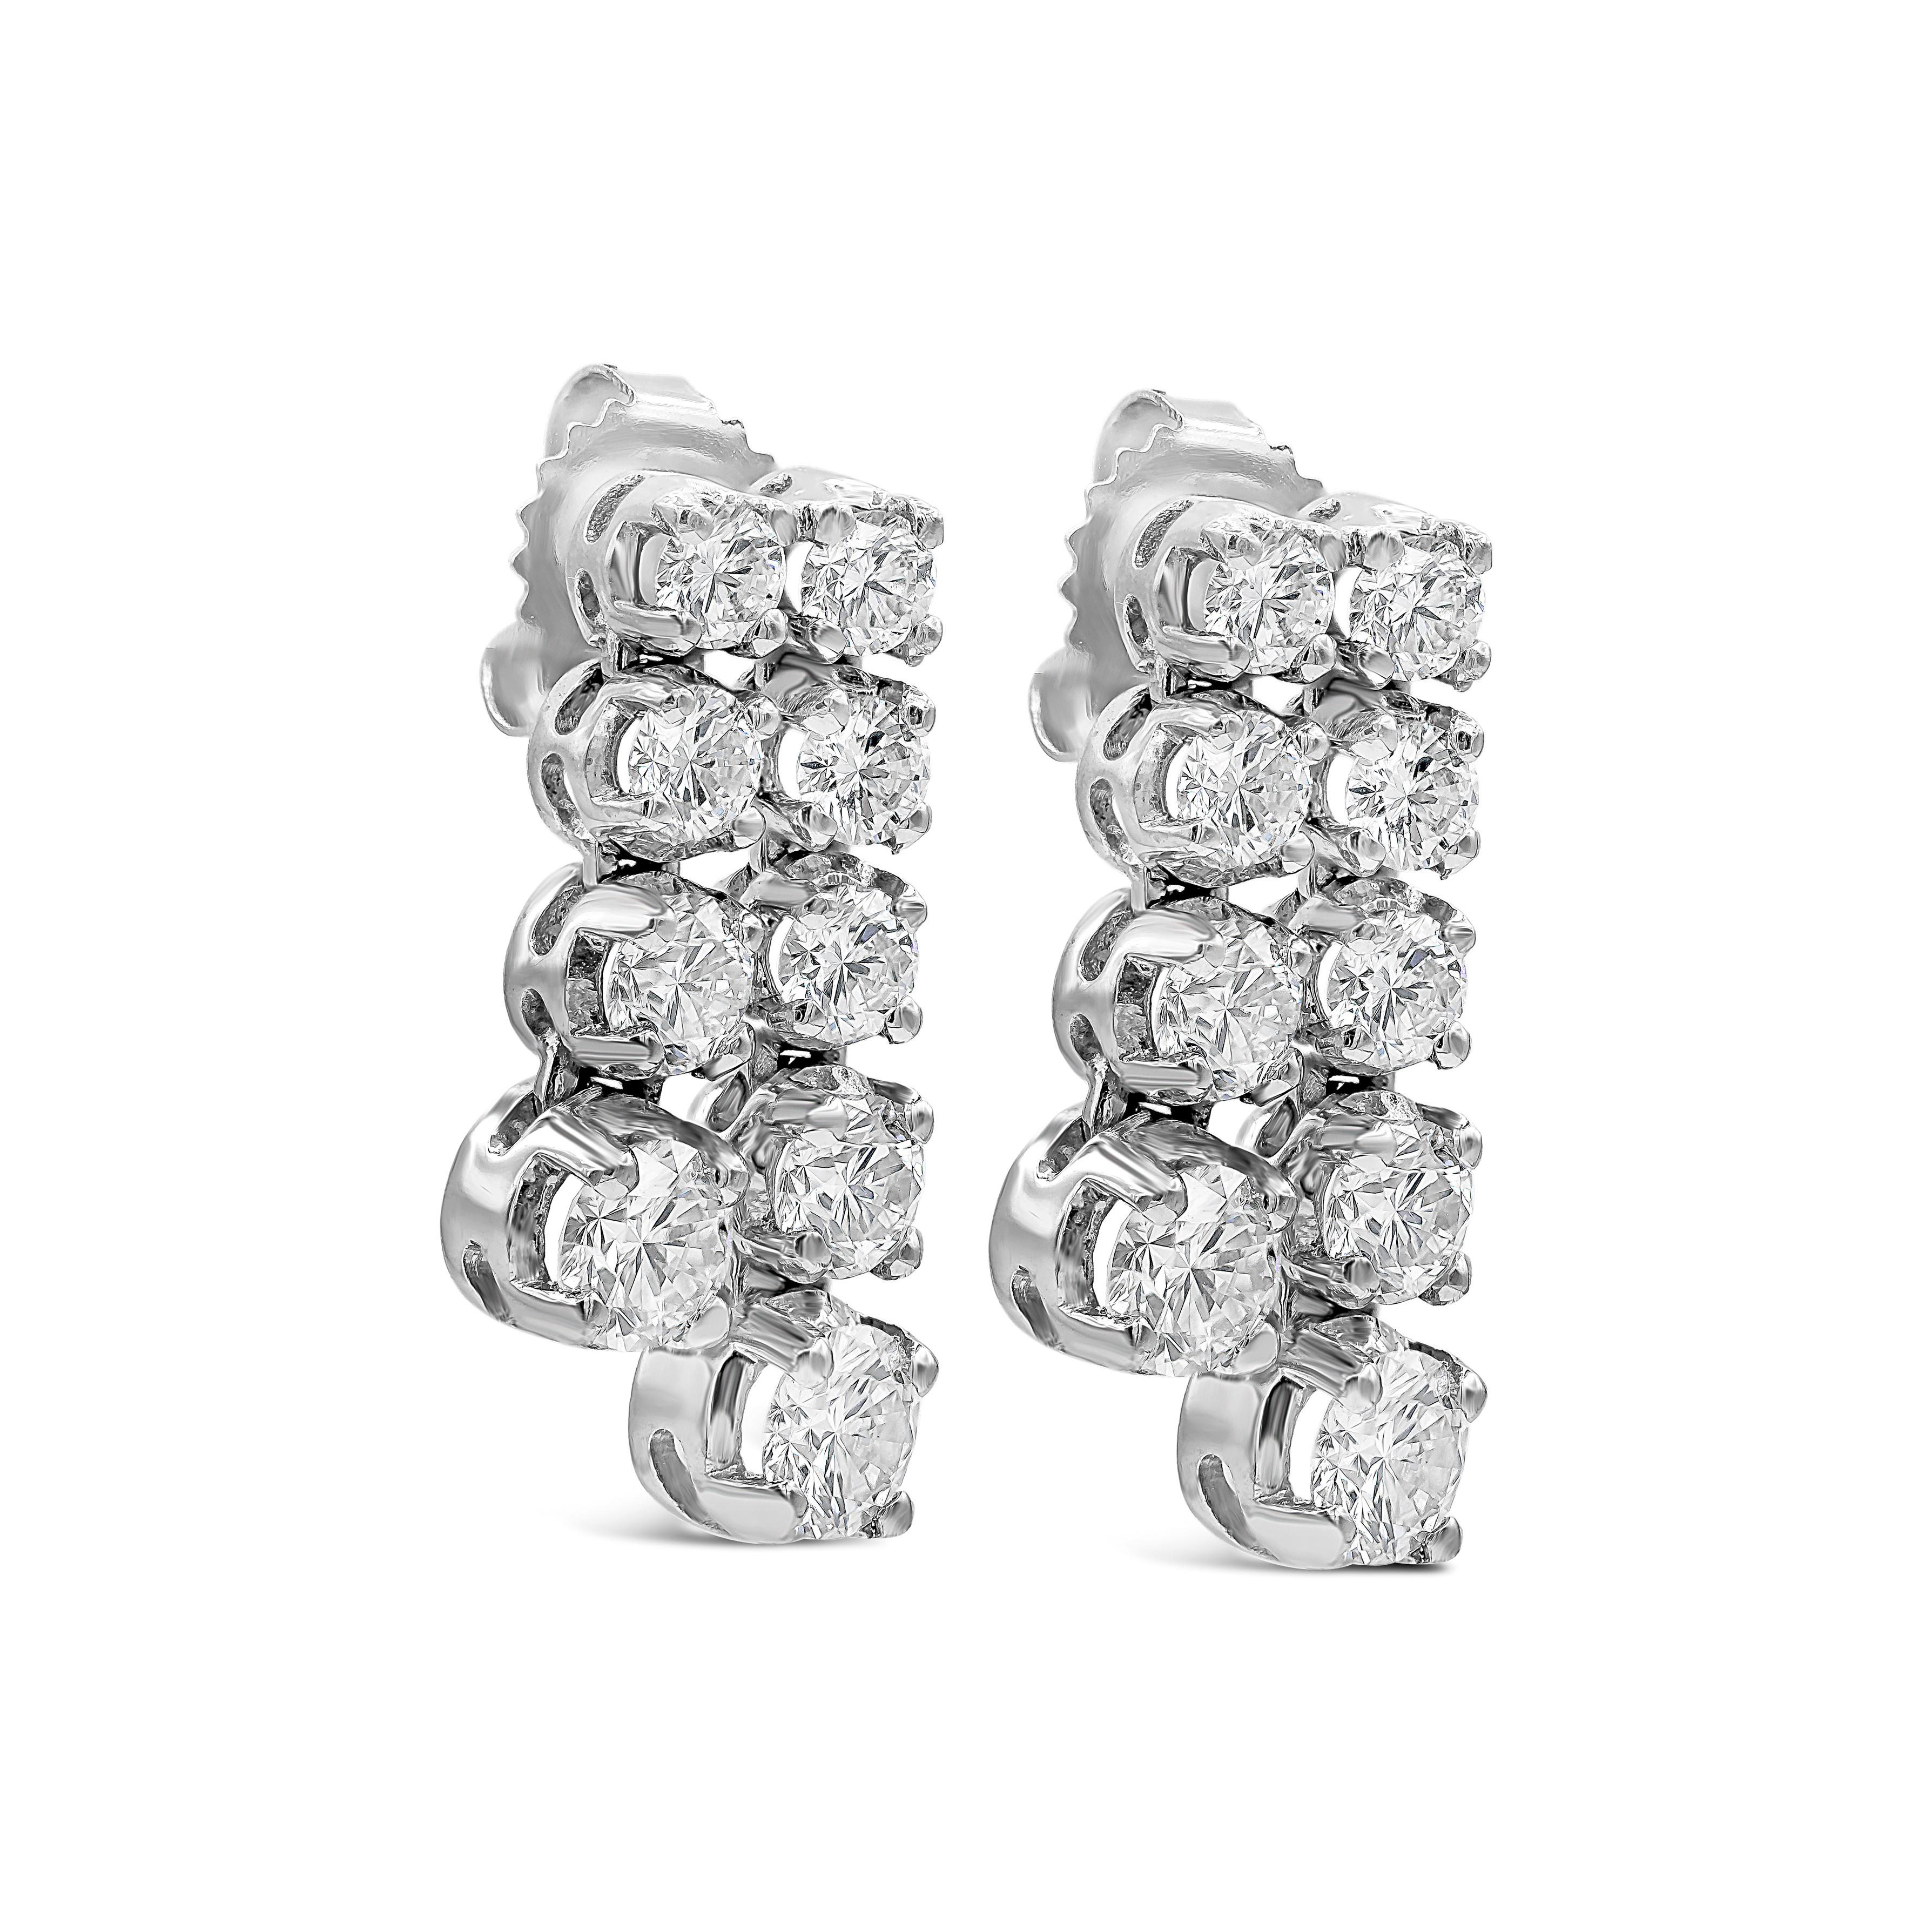 Each earring features two rows of round brilliant diamonds that gradually increases in size as it drops from the earrings. Set in 18 karat white gold. Diamonds weigh 3.83 carats total.

Style available in different price ranges. Prices are based on